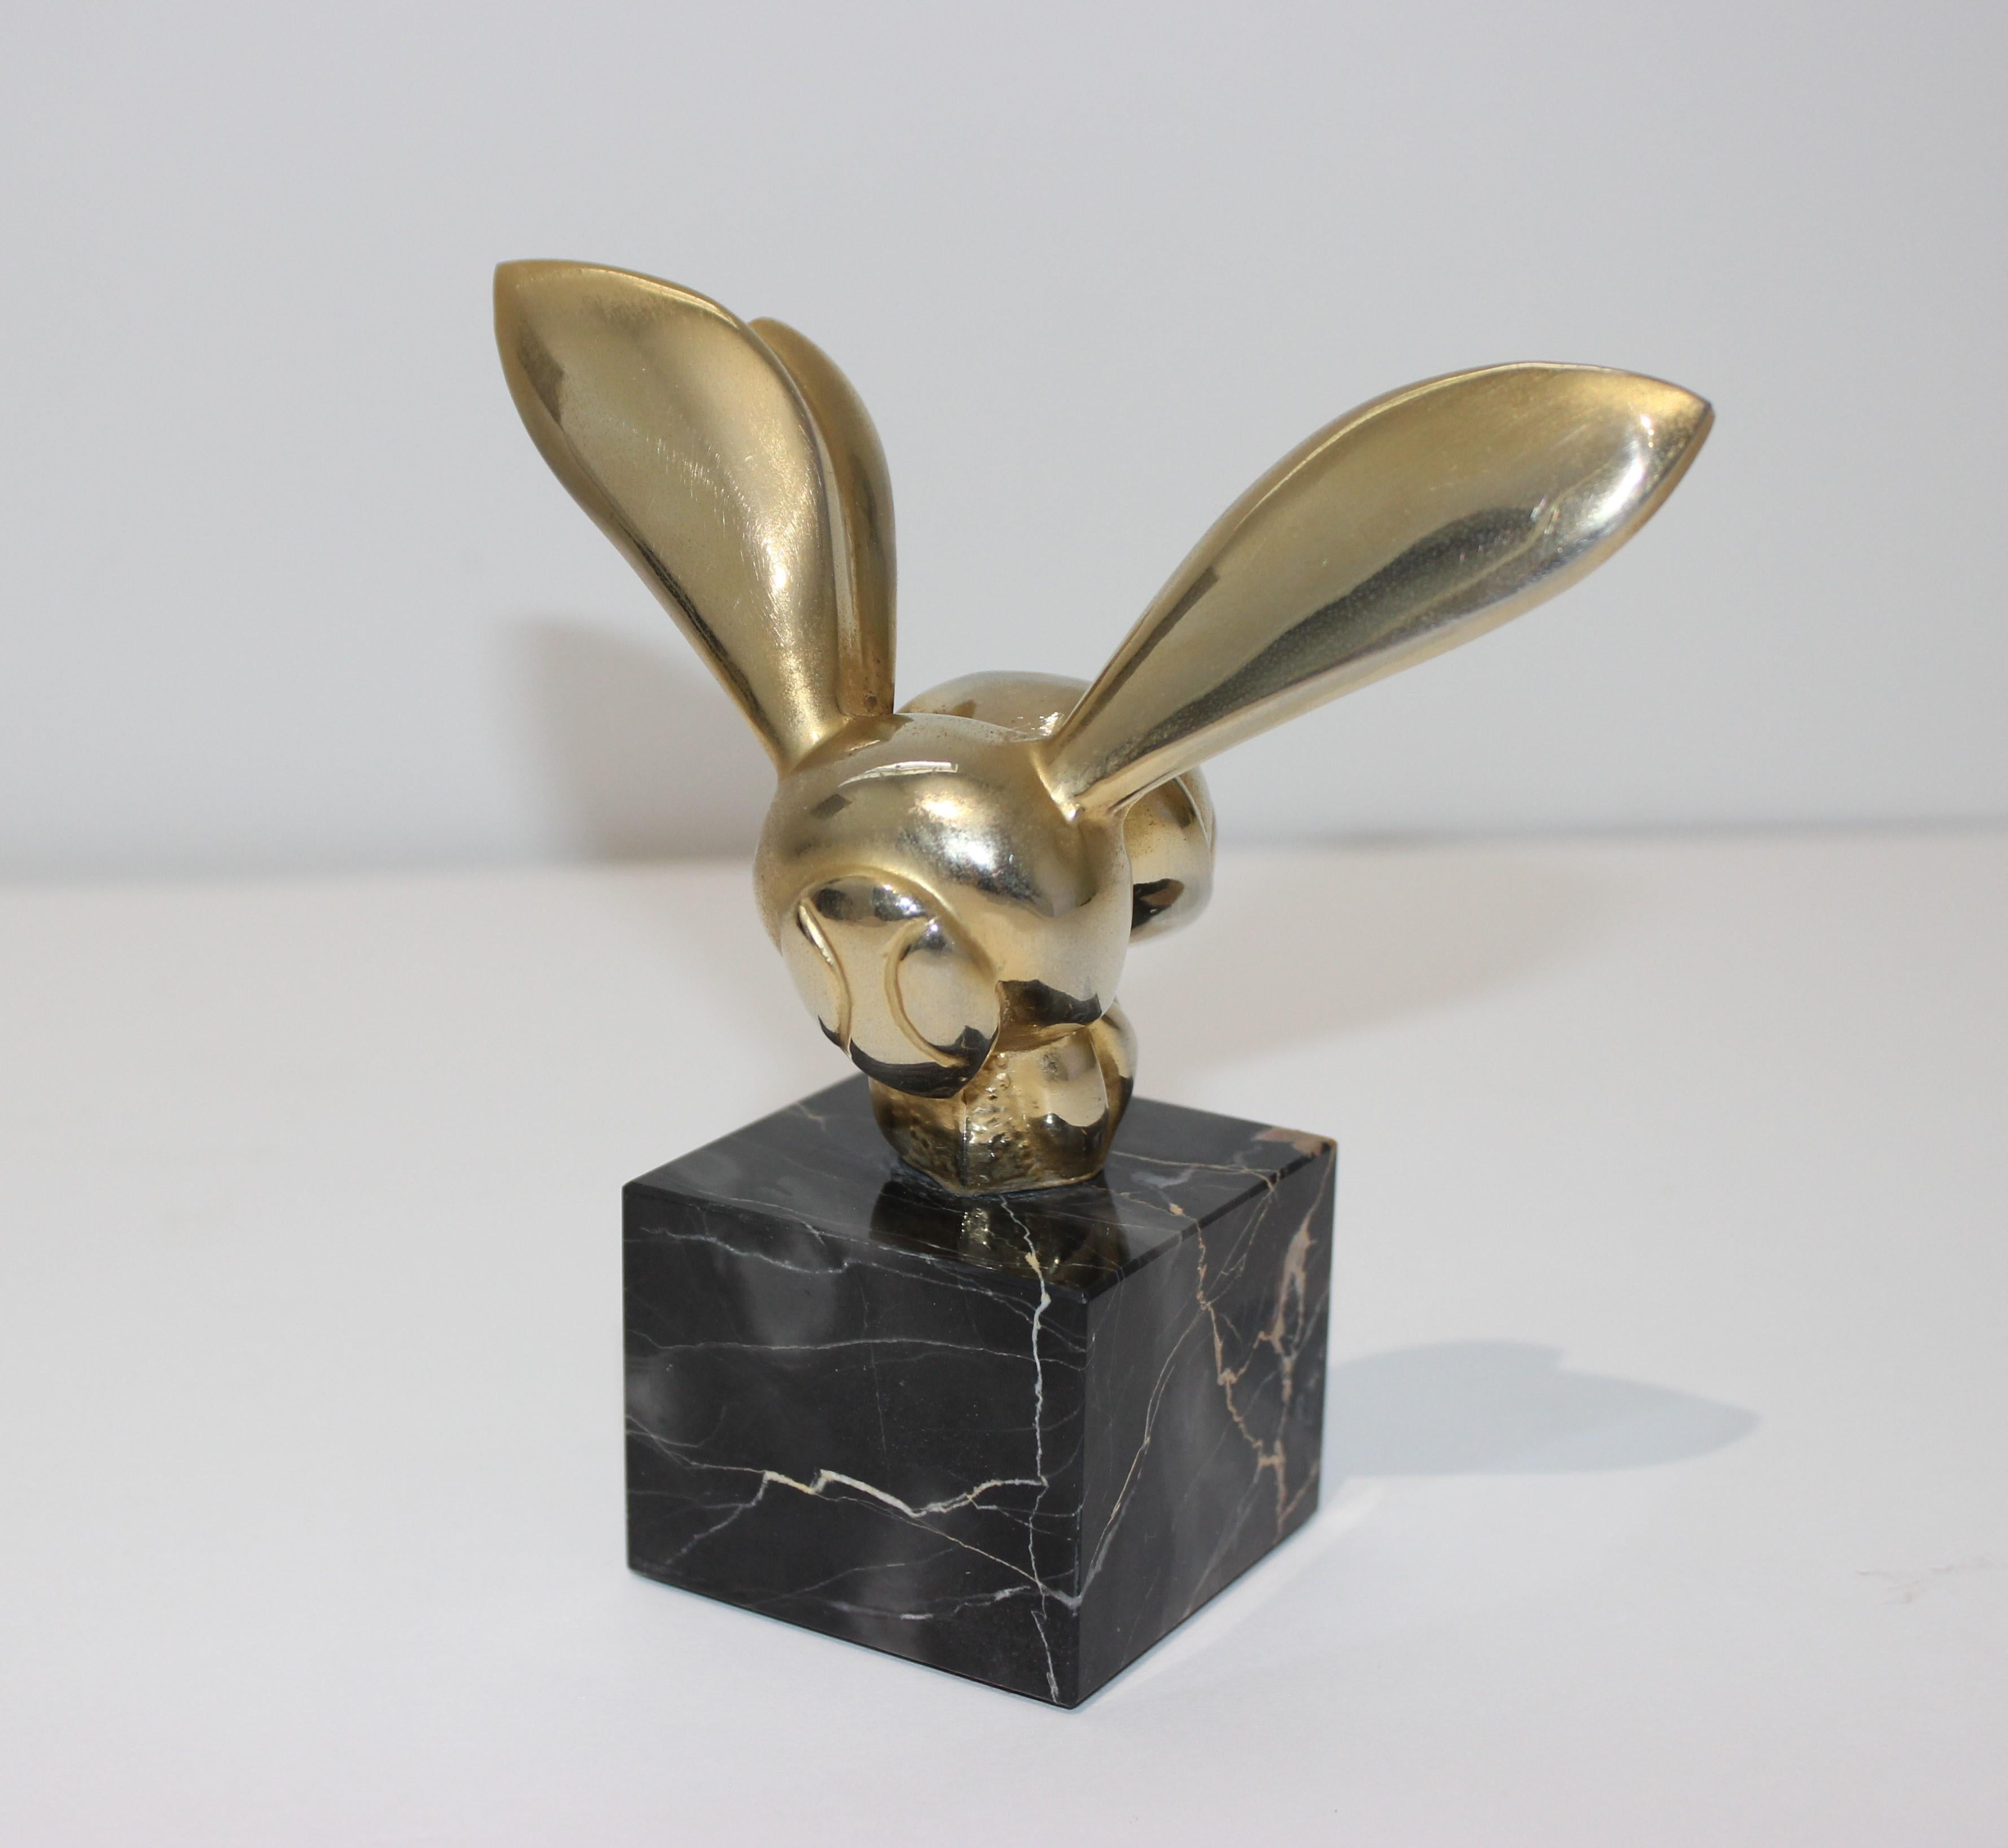 Bumble Bee Sculpture After G. Lachaise 1